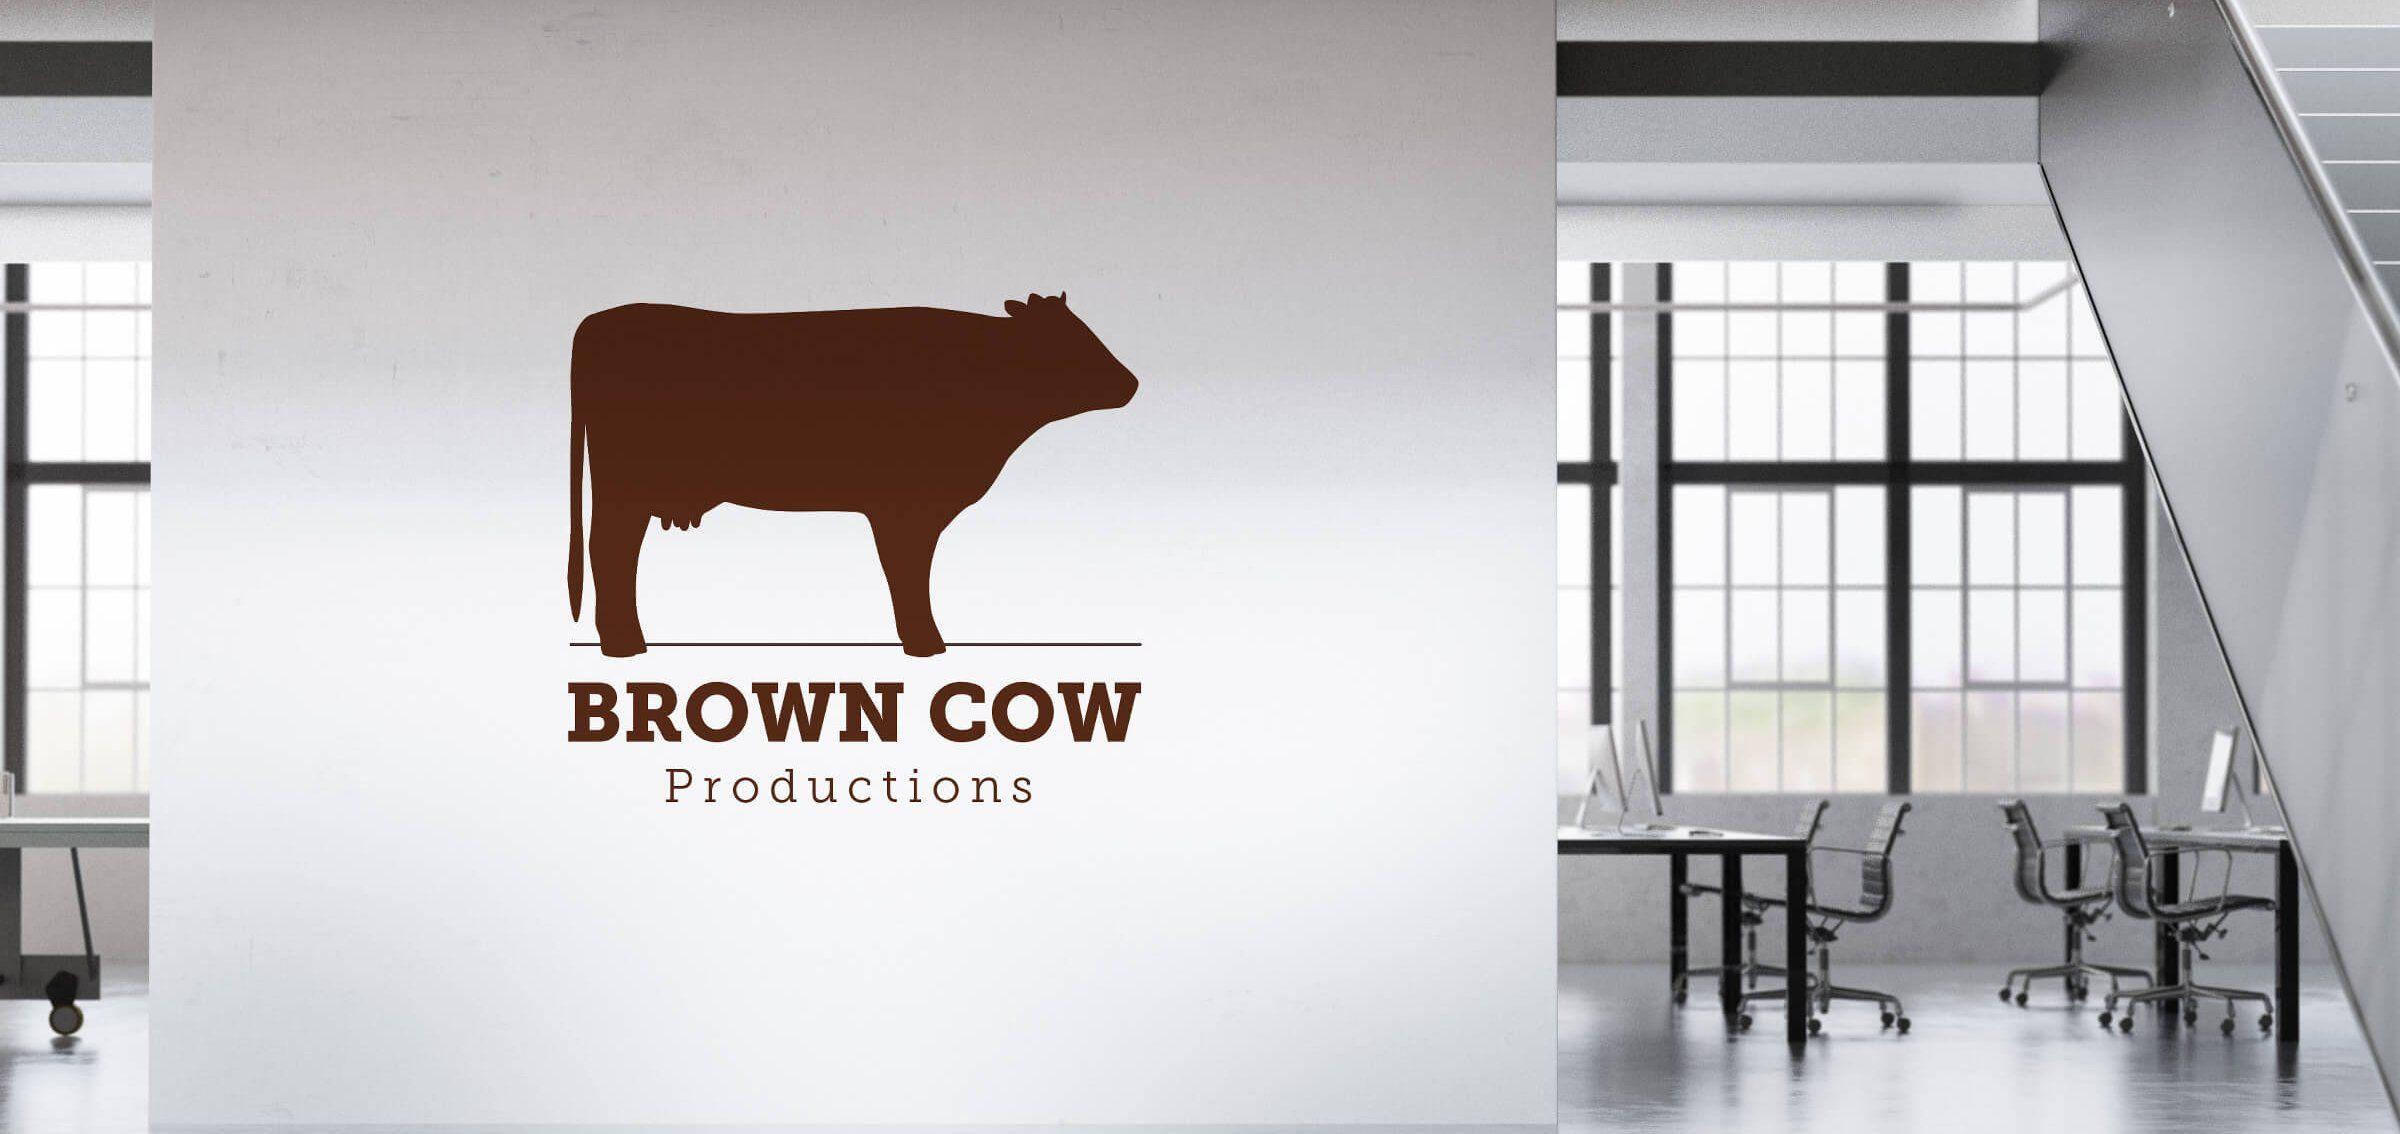 Brown Cow Logo - Brown Cow Productions - Branding - Image Plus